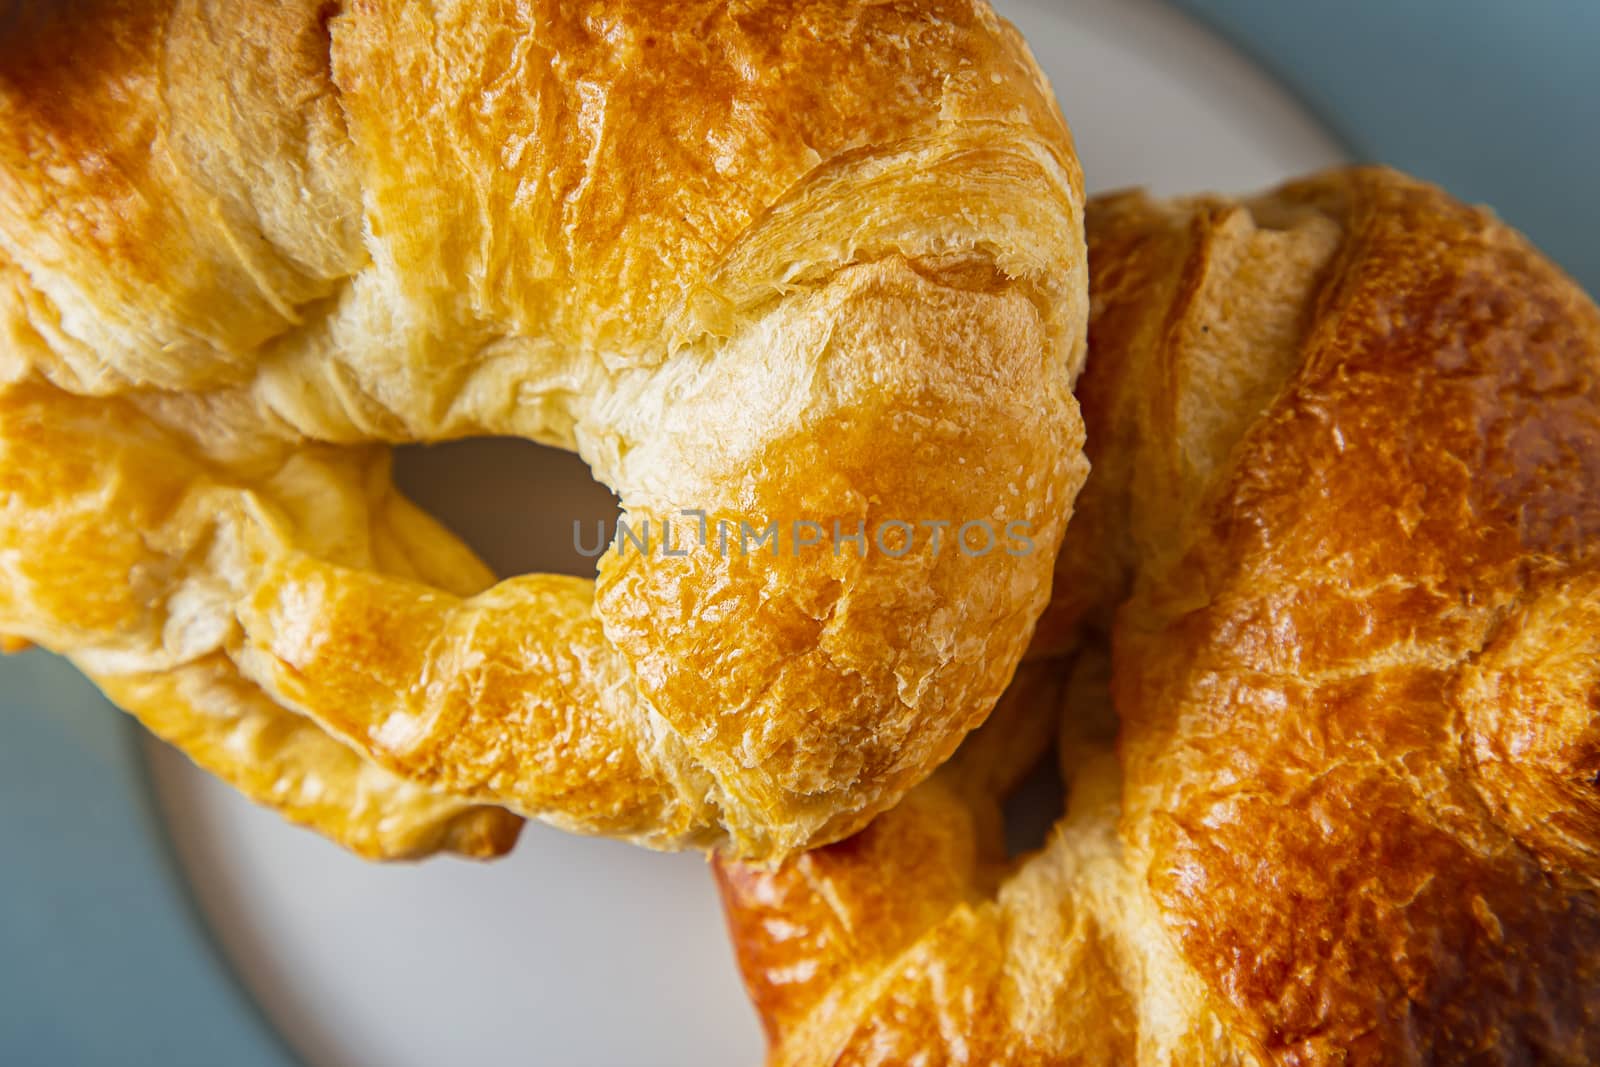 close up top view of two croissant on a blue rimmed plate